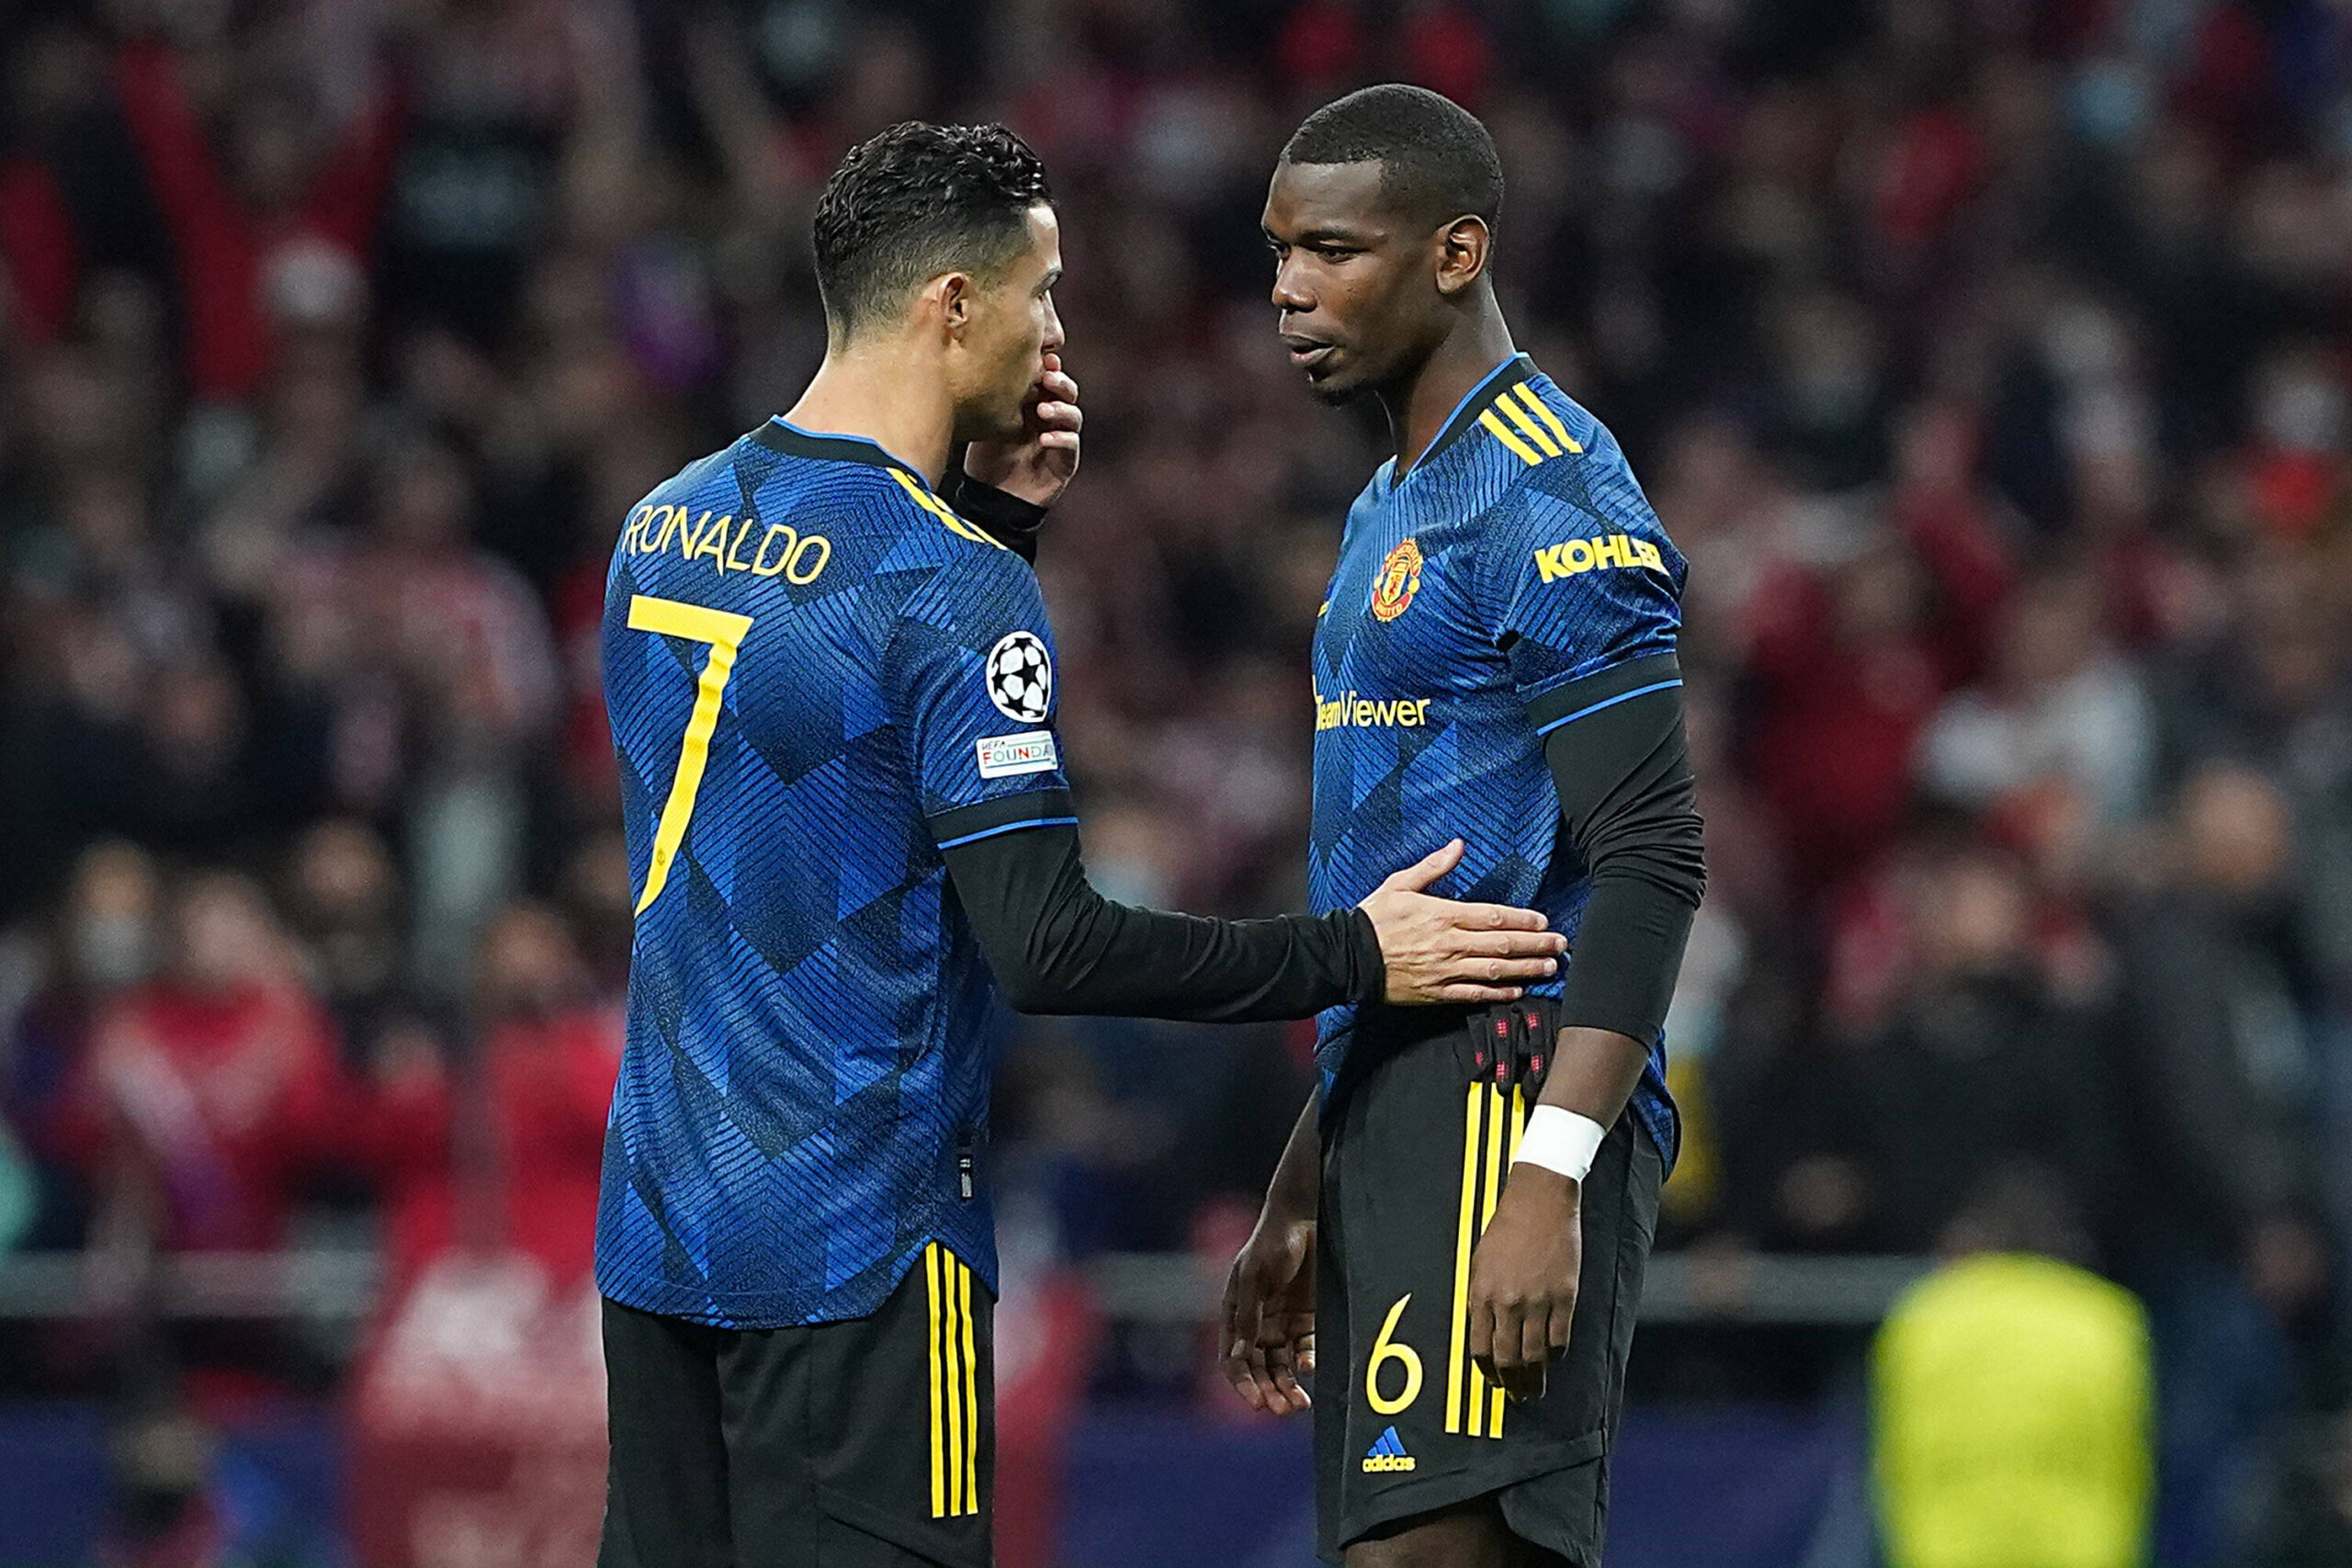 Cristiano Ronaldo and Paul Pogba speaking during a match